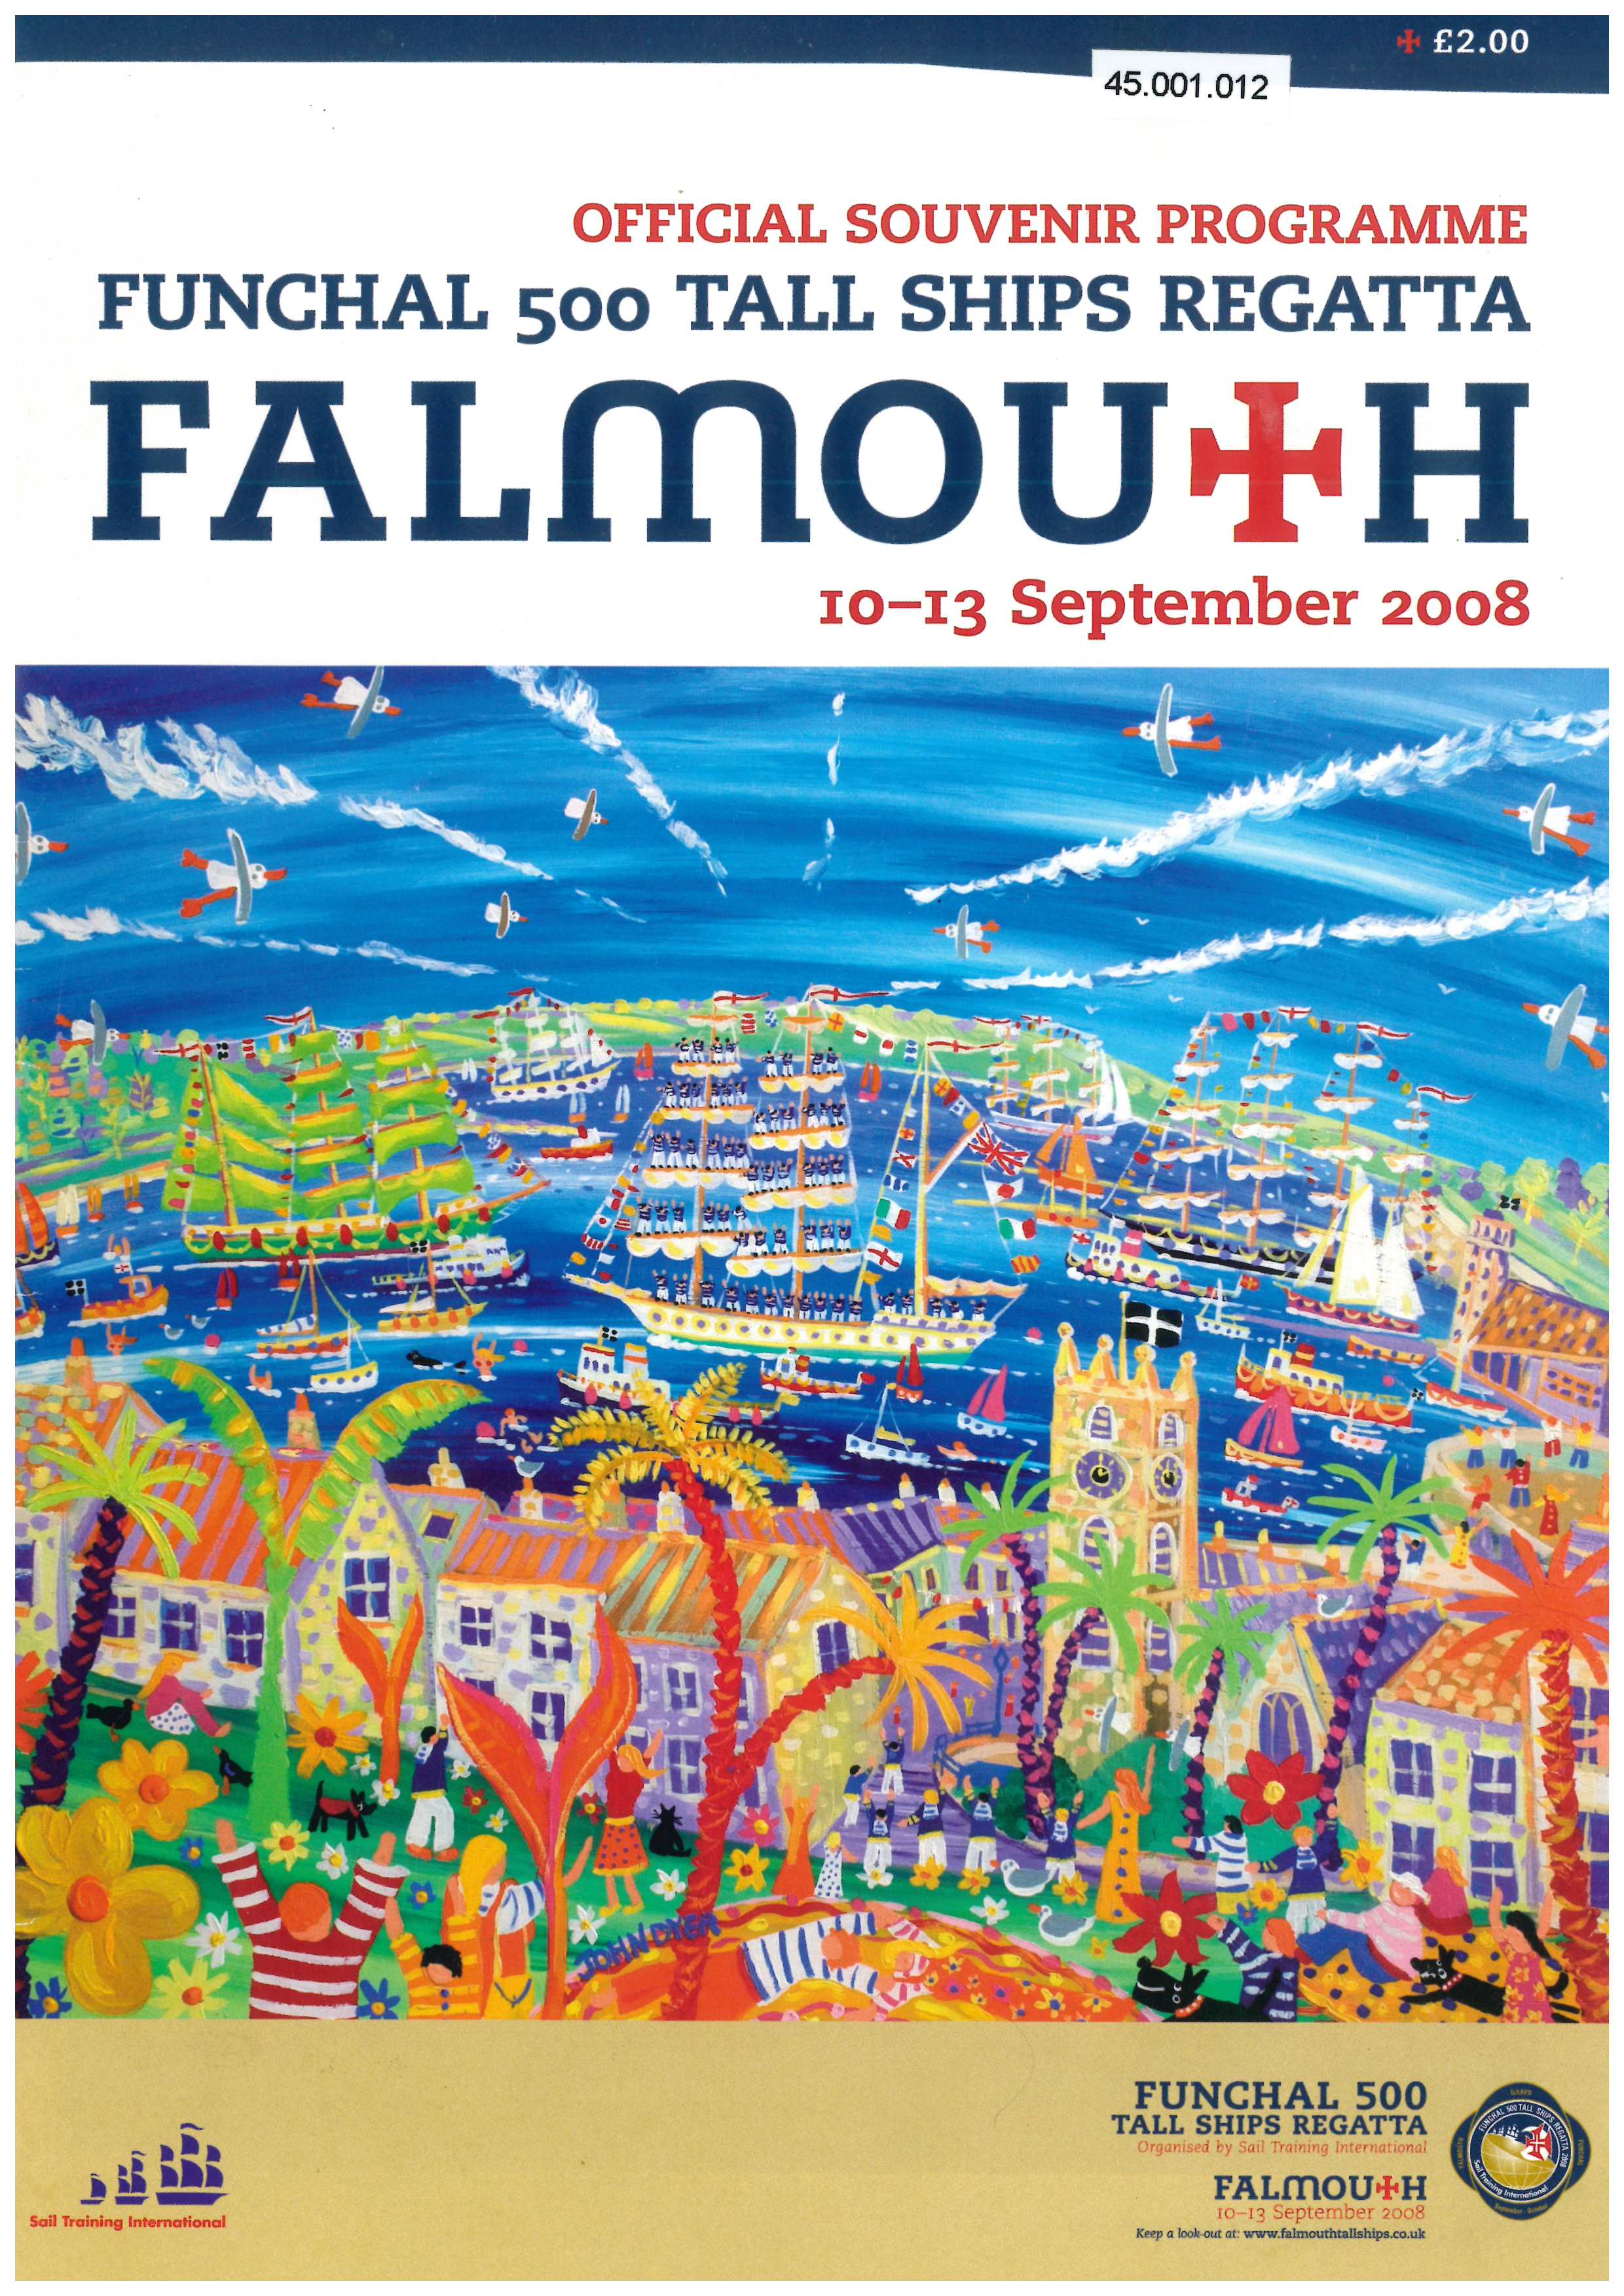 A scan of the official souvenir programme of the Funchal 500 Tall Ships Regatta in Falmouth, 2008. The scan is of the front cover, which features a brightly coloured illustration of several tall ships in Falmouth Harbour.